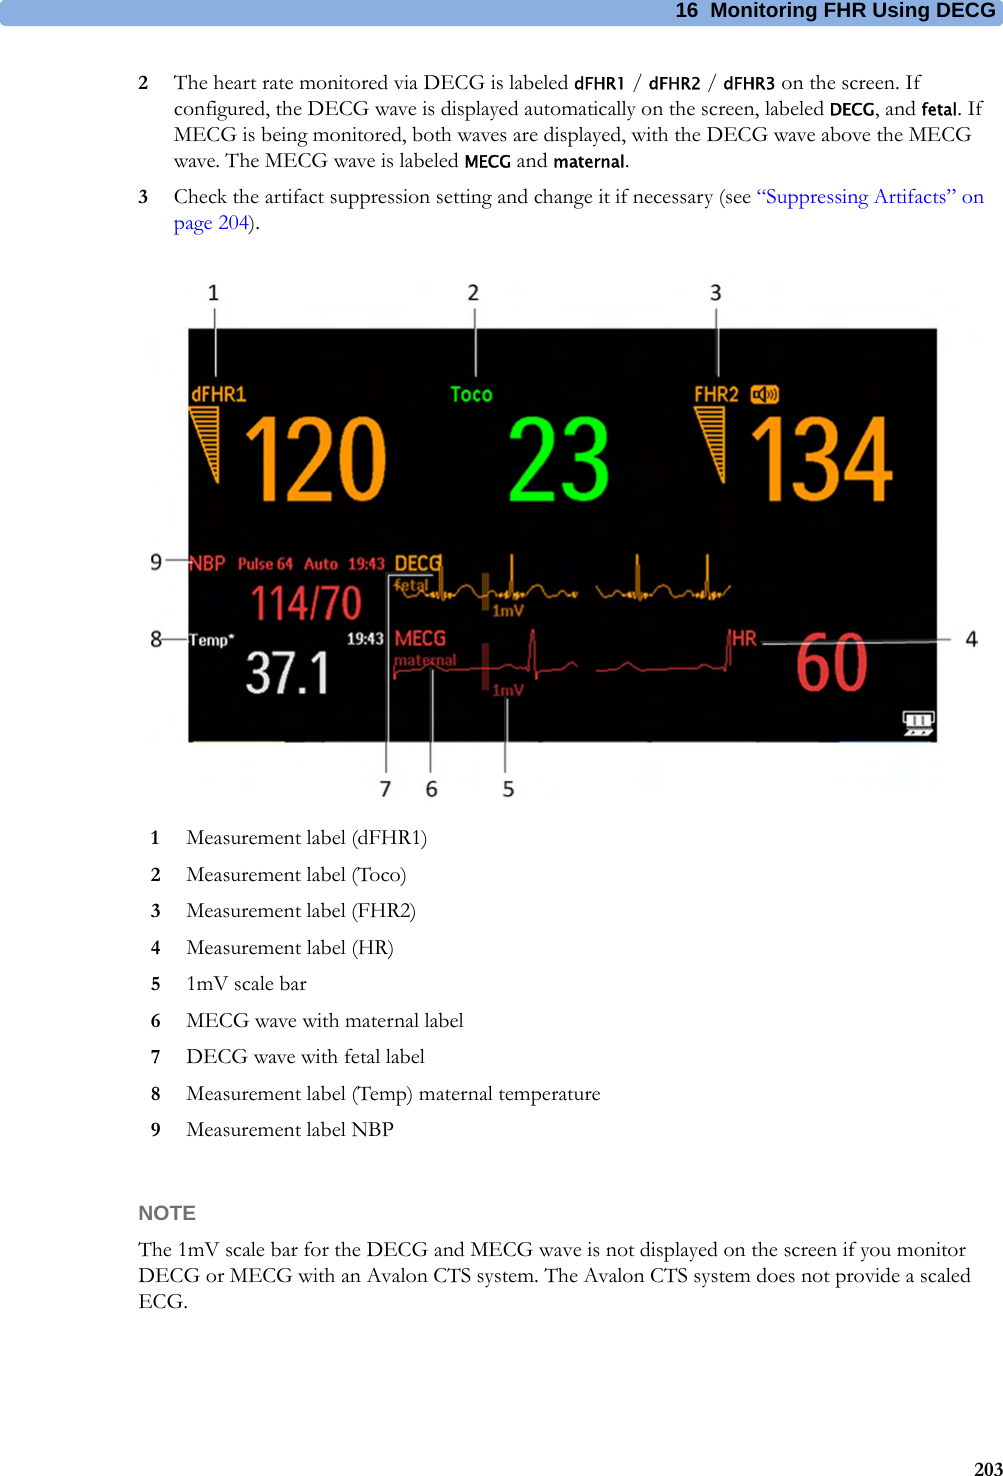 16  Monitoring FHR Using DECG2032The heart rate monitored via DECG is labeled dFHR1 / dFHR2 / dFHR3 on the screen. If configured, the DECG wave is displayed automatically on the screen, labeled DECG, and fetal. If MECG is being monitored, both waves are displayed, with the DECG wave above the MECG wave. The MECG wave is labeled MECG and maternal.3Check the artifact suppression setting and change it if necessary (see “Suppressing Artifacts” on page 204).NOTEThe 1mV scale bar for the DECG and MECG wave is not displayed on the screen if you monitor DECG or MECG with an Avalon CTS system. The Avalon CTS system does not provide a scaled ECG.1Measurement label (dFHR1)2Measurement label (Toco)3Measurement label (FHR2)4Measurement label (HR)51mV scale bar6MECG wave with maternal label7DECG wave with fetal label8Measurement label (Temp) maternal temperature9Measurement label NBP